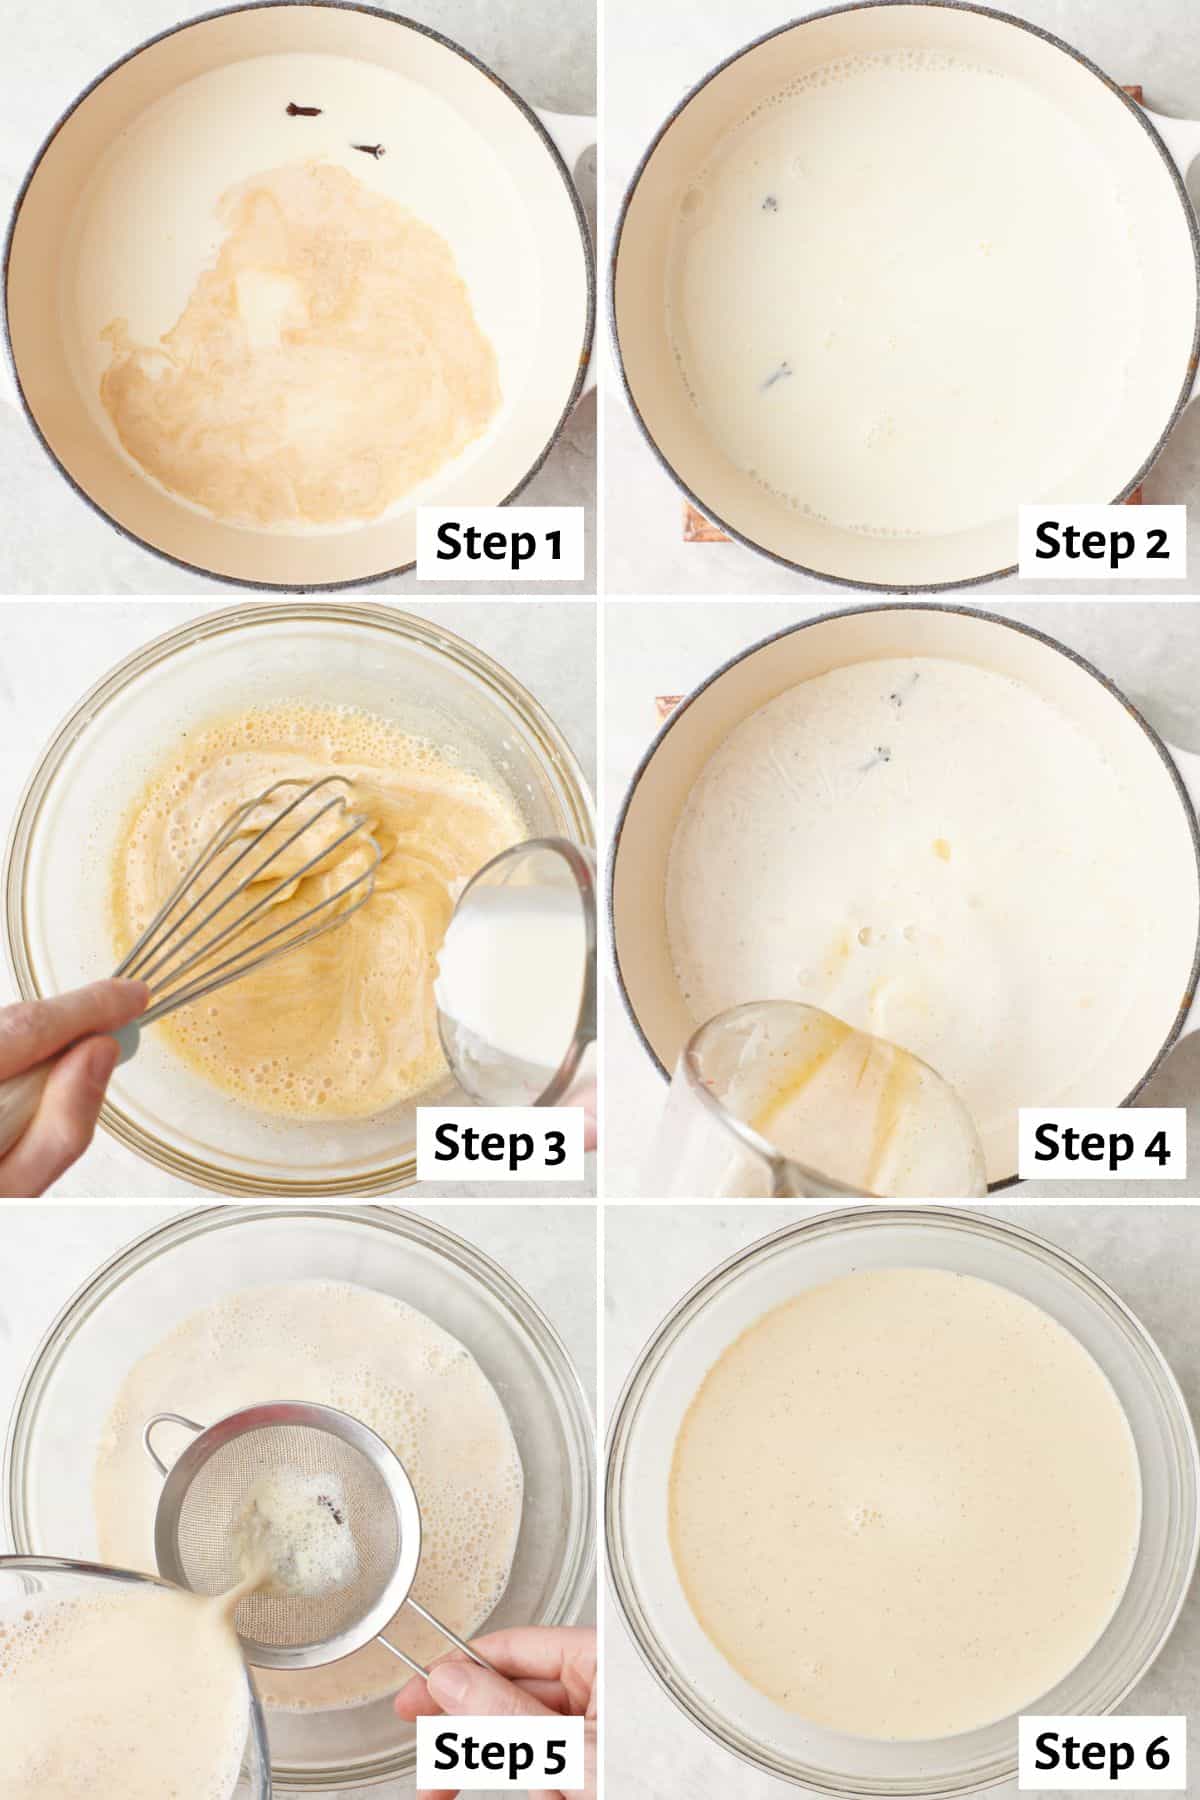 6 image collage making recipe: step 1- milk, cream, vanilla, and cloves in a medium saucepan, step 2- milk mixture after simmering with bubbles around the side of the pan, step 3- pouring in some milk to the egg mixture bowl while whisking to temper, step 4- egg mixture added to pot with remaining milk, step 5- mixture being strained through a fine mesh sieve, step 6- eggnog after chilling.